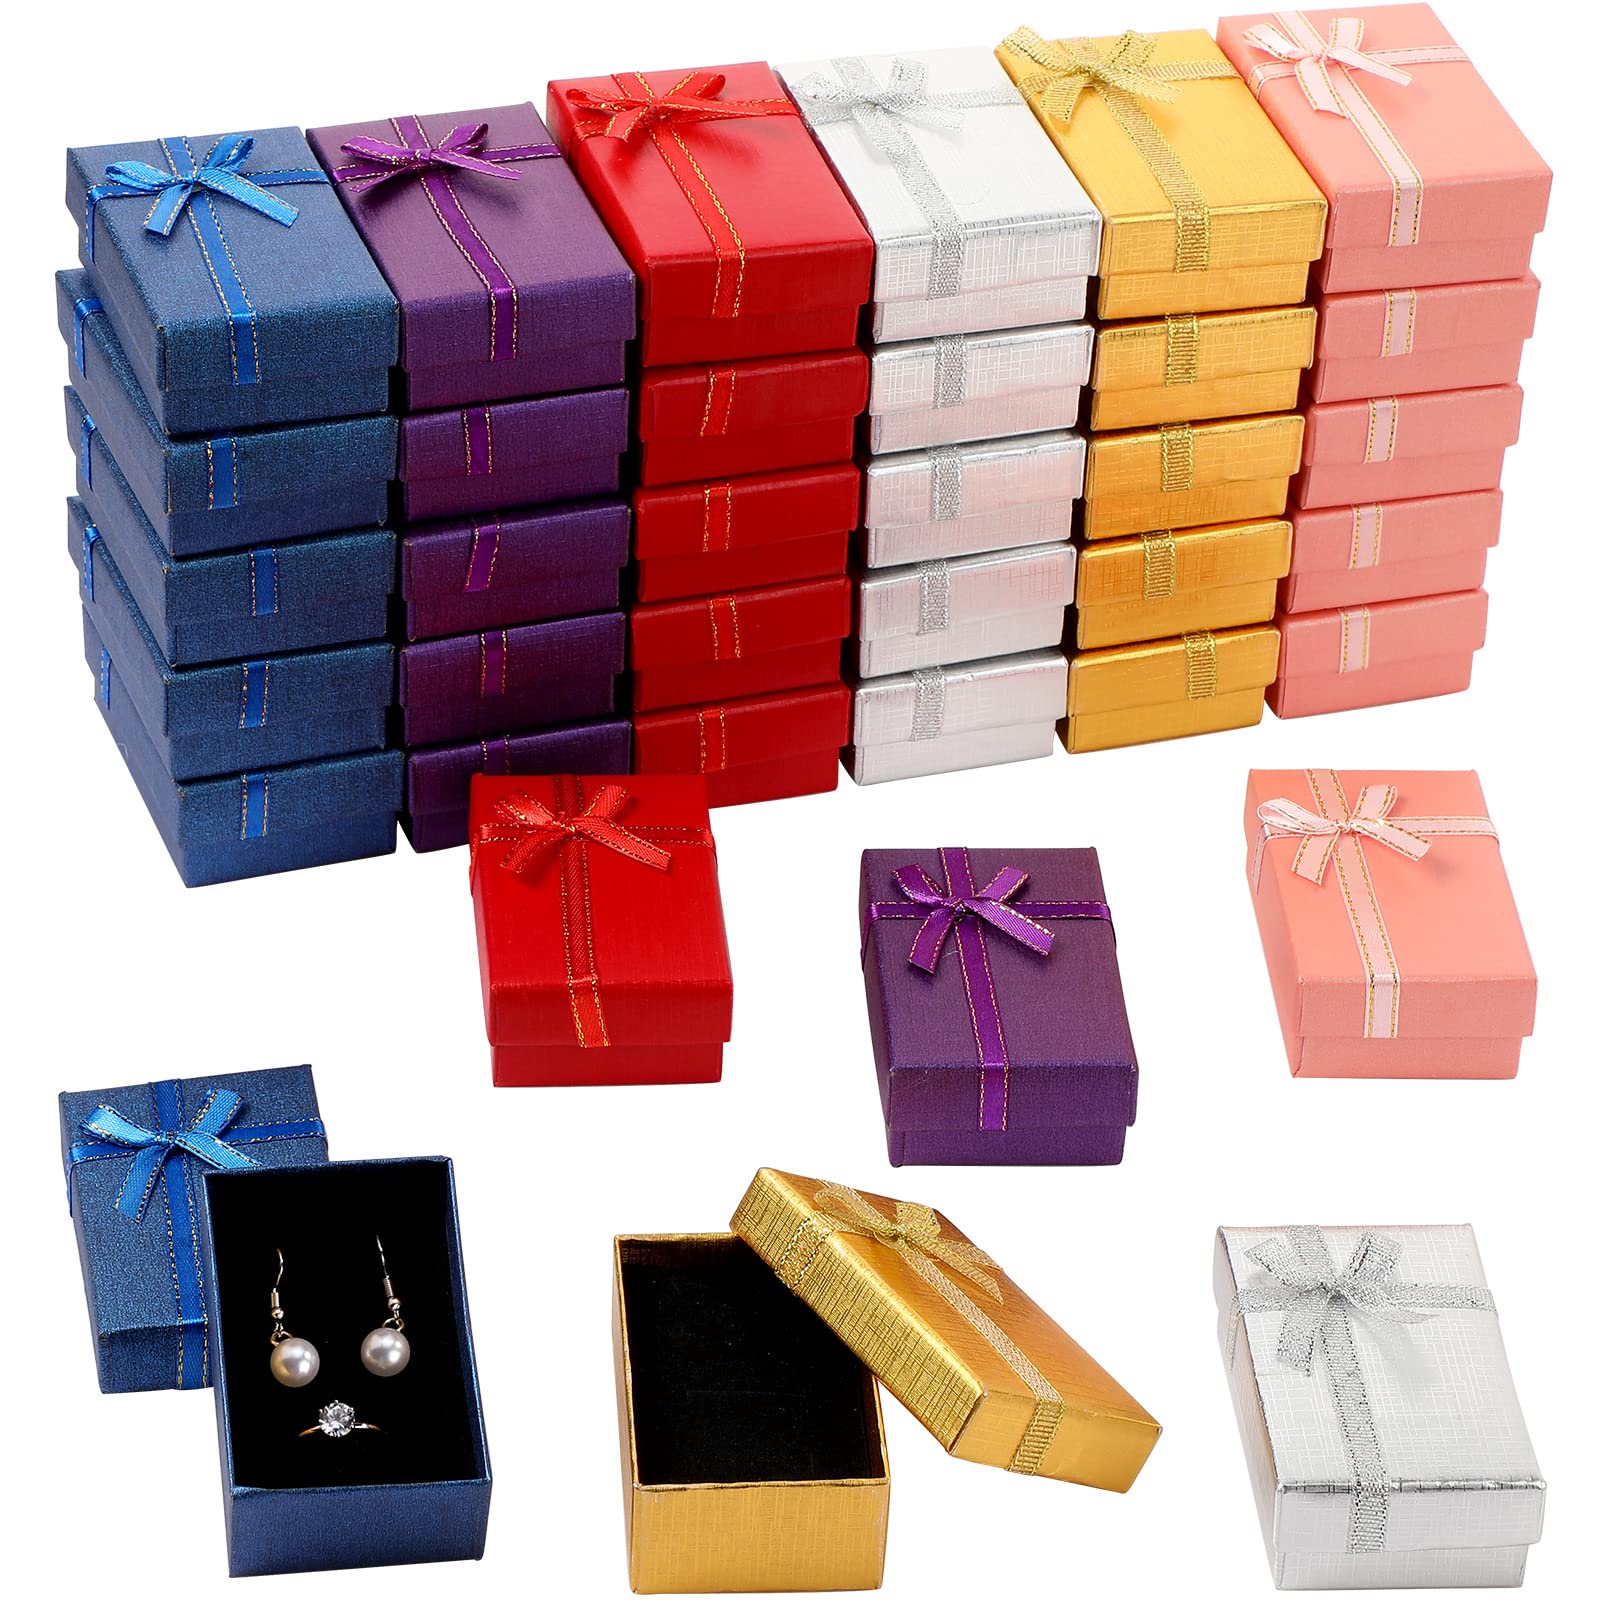 Colored Jewelry Boxes